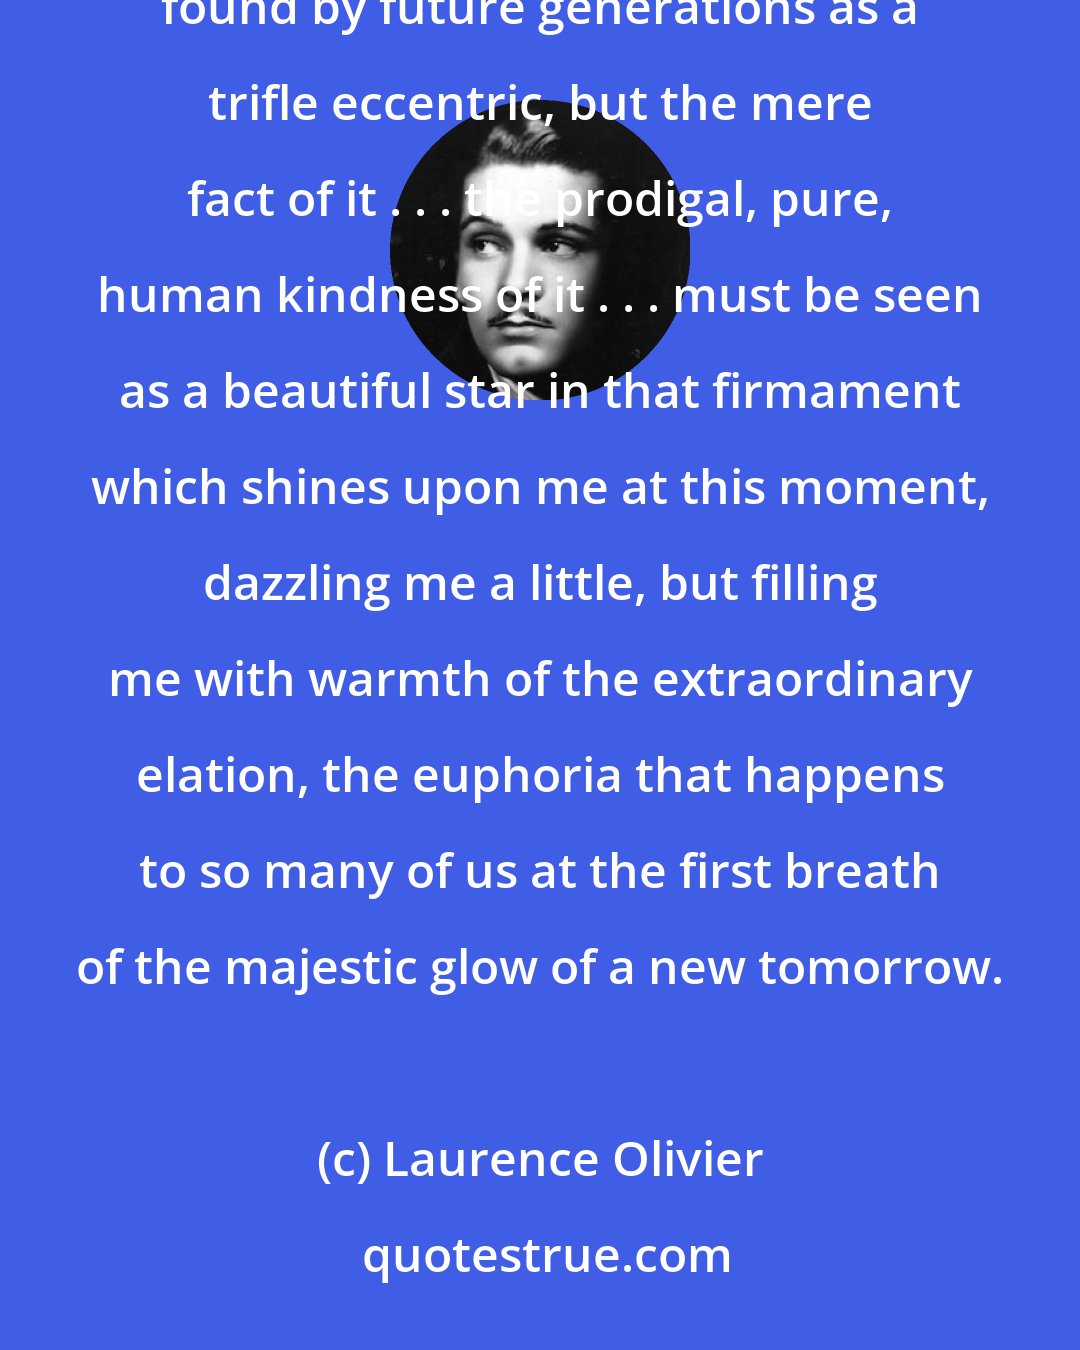 Laurence Olivier: In the great wealth, the great firmament of your nation's generosities this particular choice may perhaps be found by future generations as a trifle eccentric, but the mere fact of it . . . the prodigal, pure, human kindness of it . . . must be seen as a beautiful star in that firmament which shines upon me at this moment, dazzling me a little, but filling me with warmth of the extraordinary elation, the euphoria that happens to so many of us at the first breath of the majestic glow of a new tomorrow.